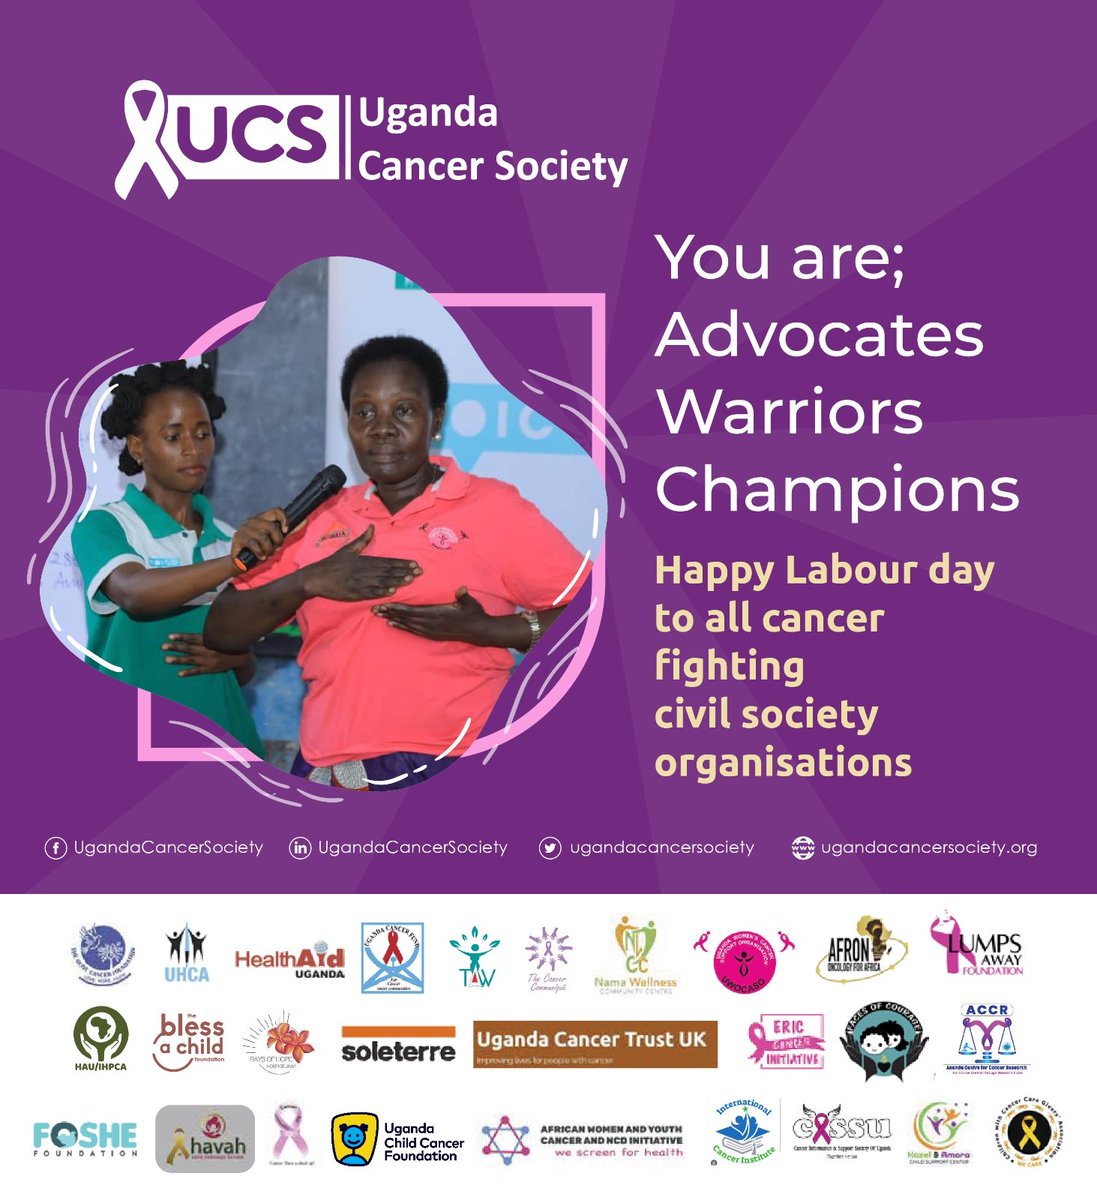 Sending a heartfelt salute to the courageous civil society organizations supporting the battle against cancer this Labour Day. Your commitment inspires hope and saves lives. Keep shining your light! #LaborDay2024